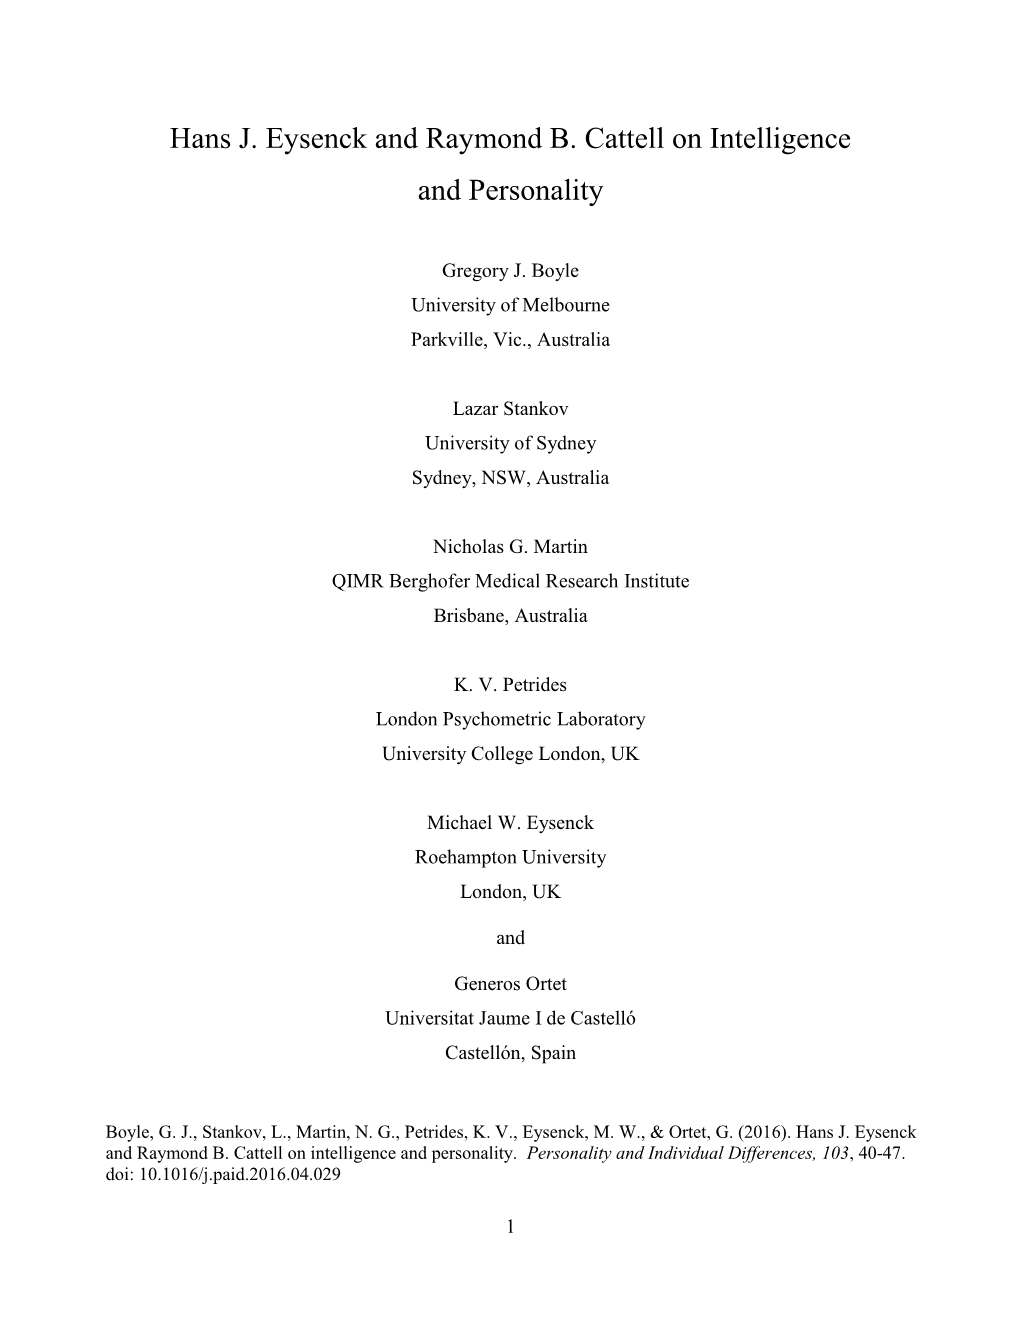 Hans J. Eysenck and Raymond B. Cattell on Intelligence and Personality